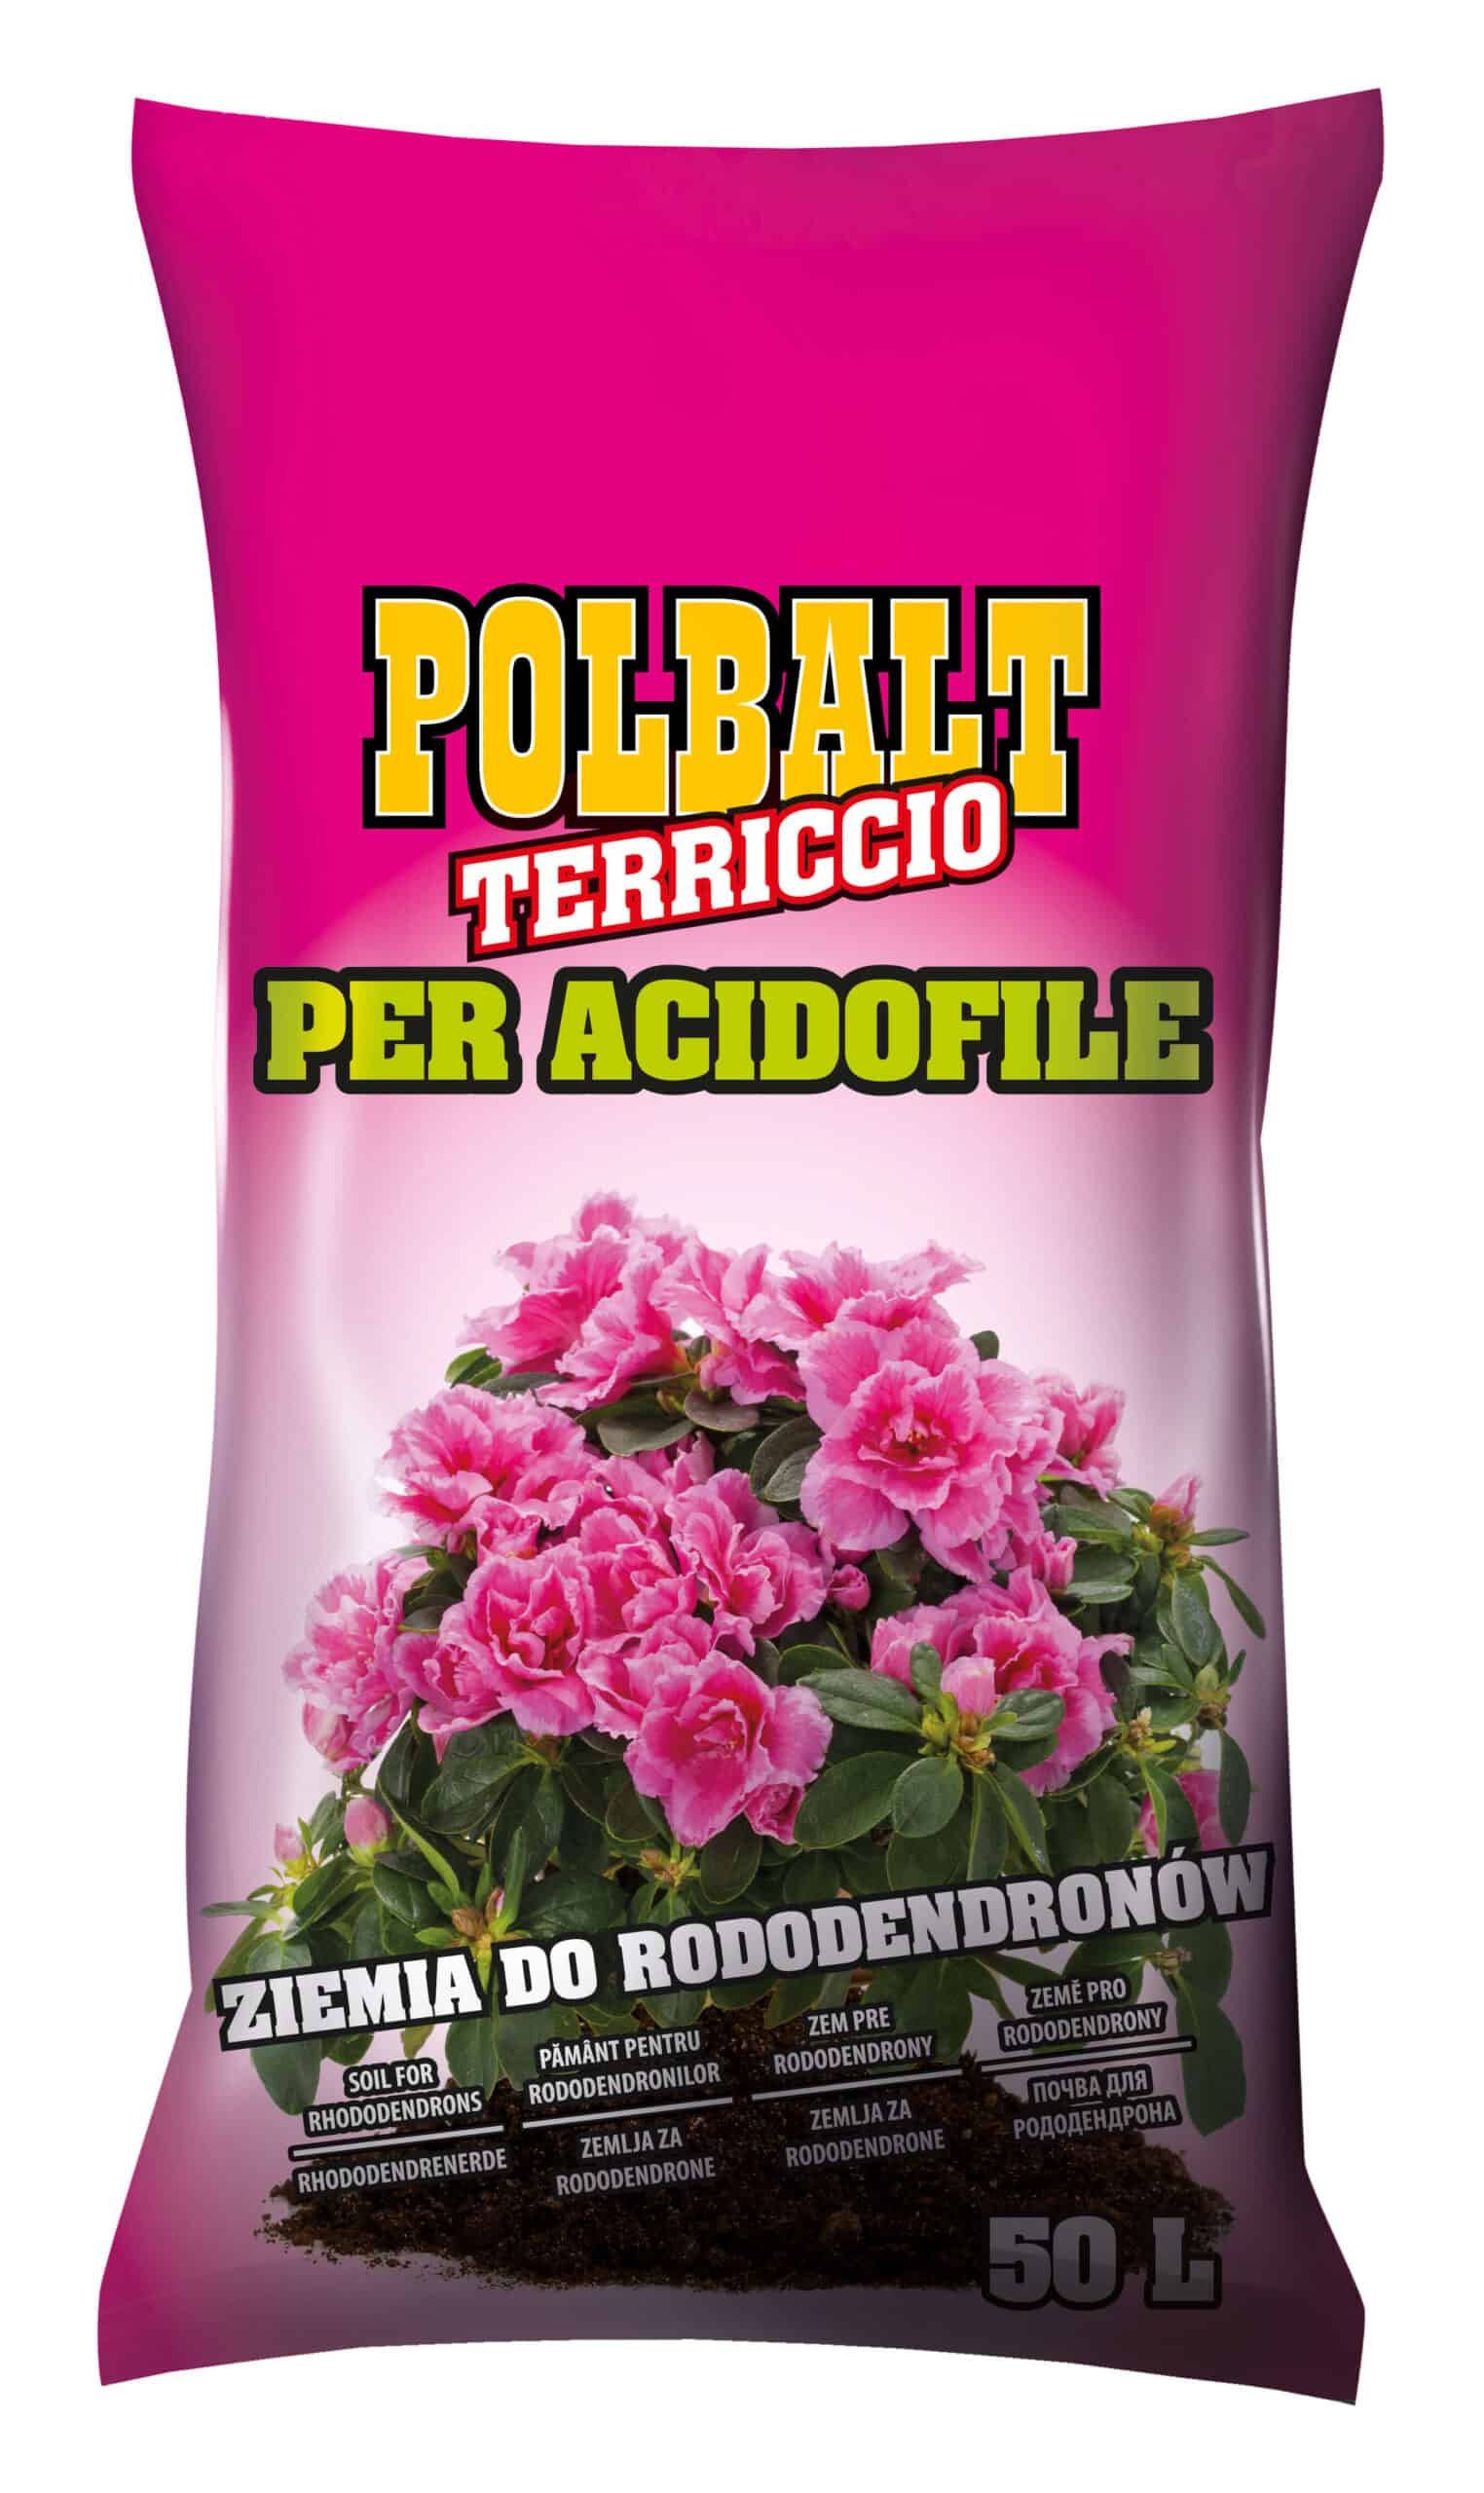 a package of Polbalt substrate for rhododendrons